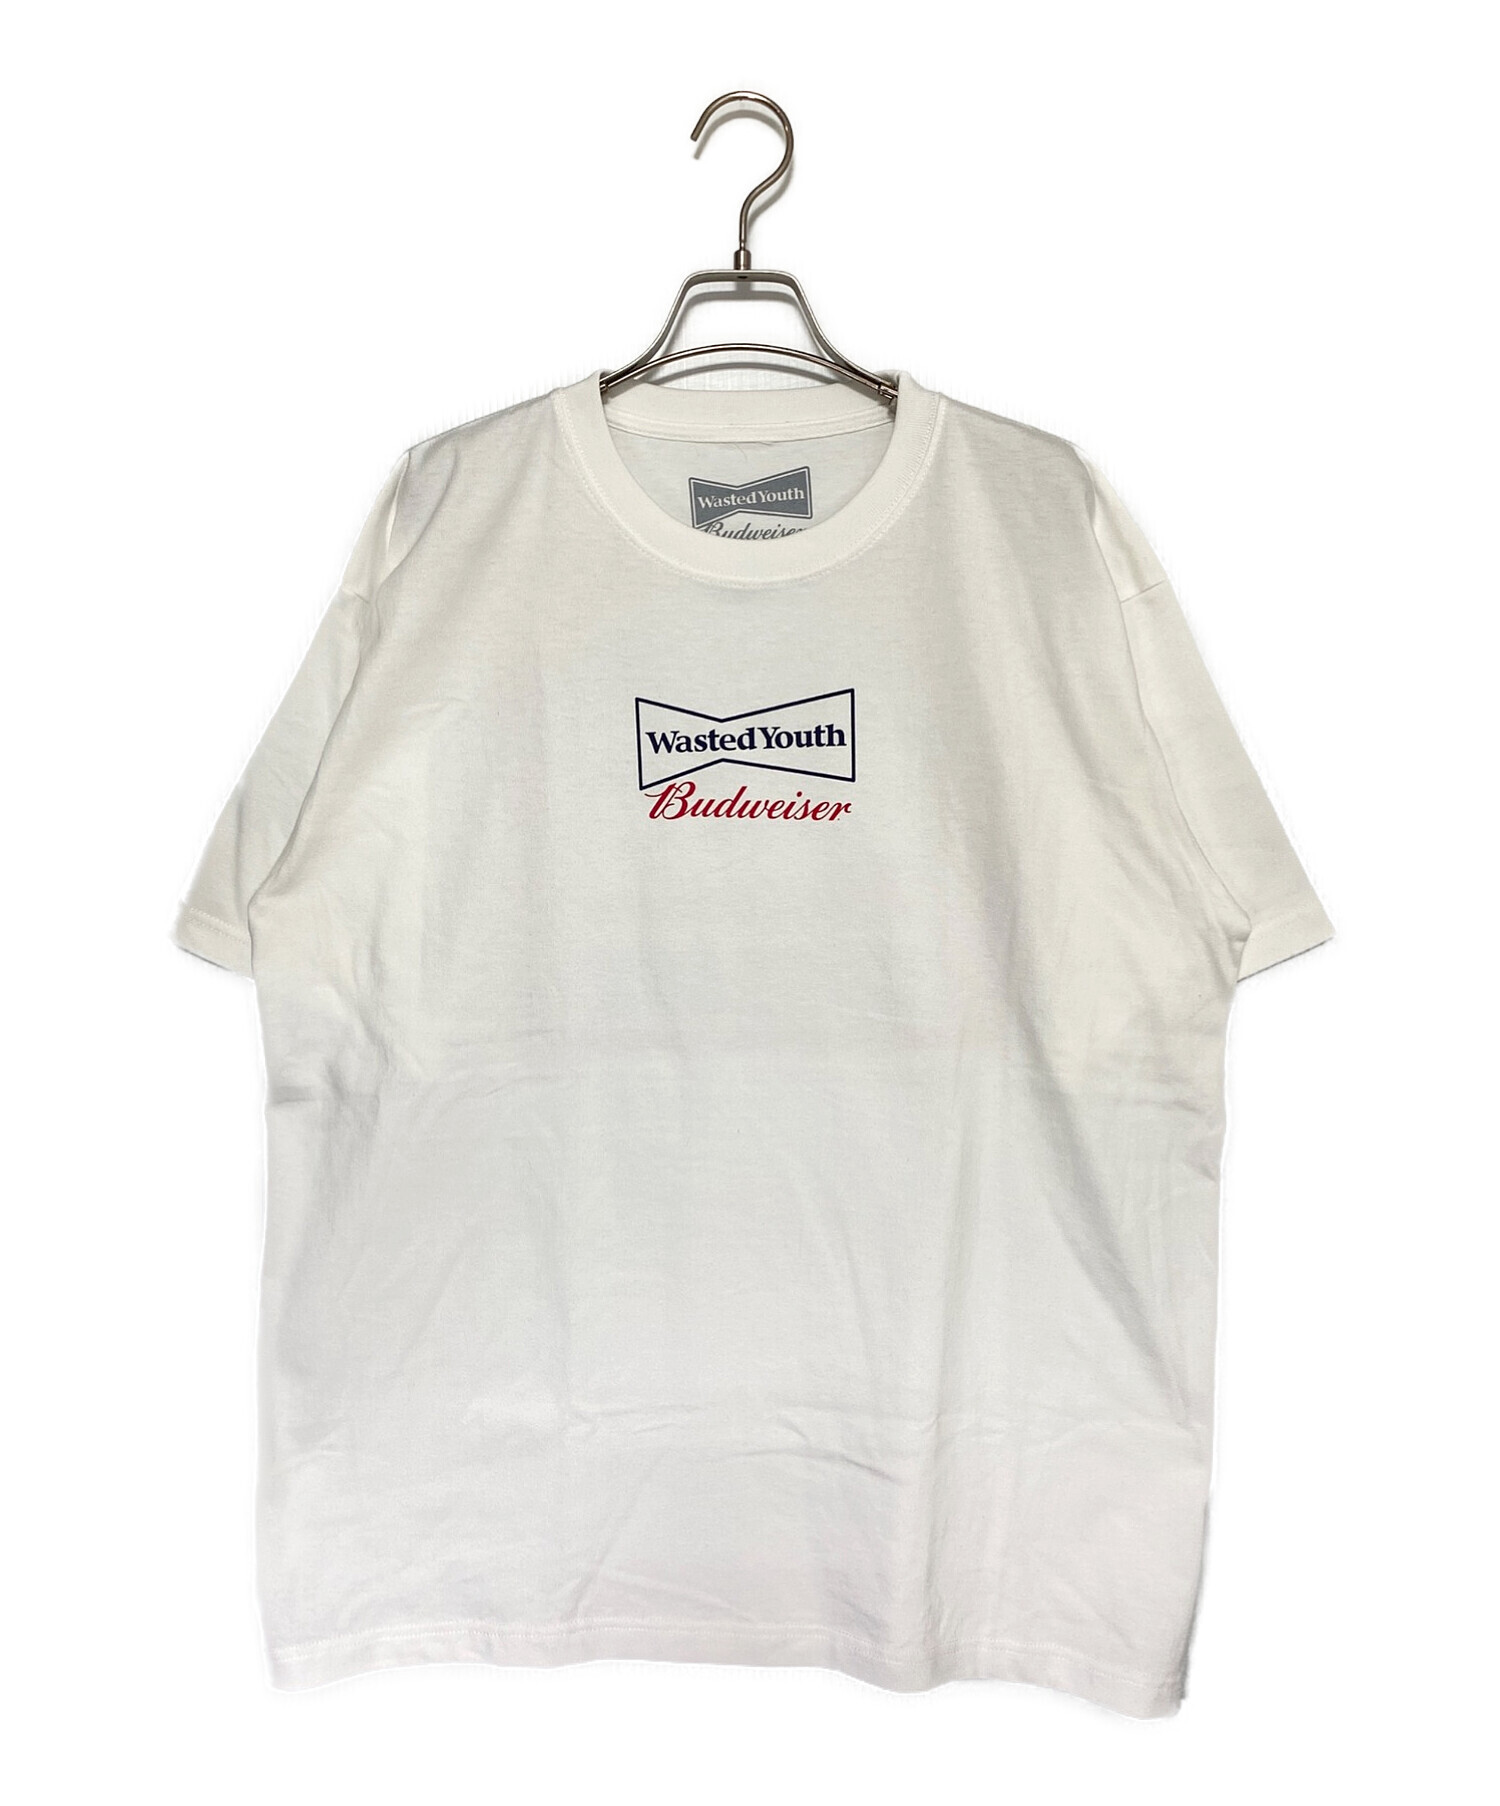 WYxBW T-SHIRT white XL wasted youth